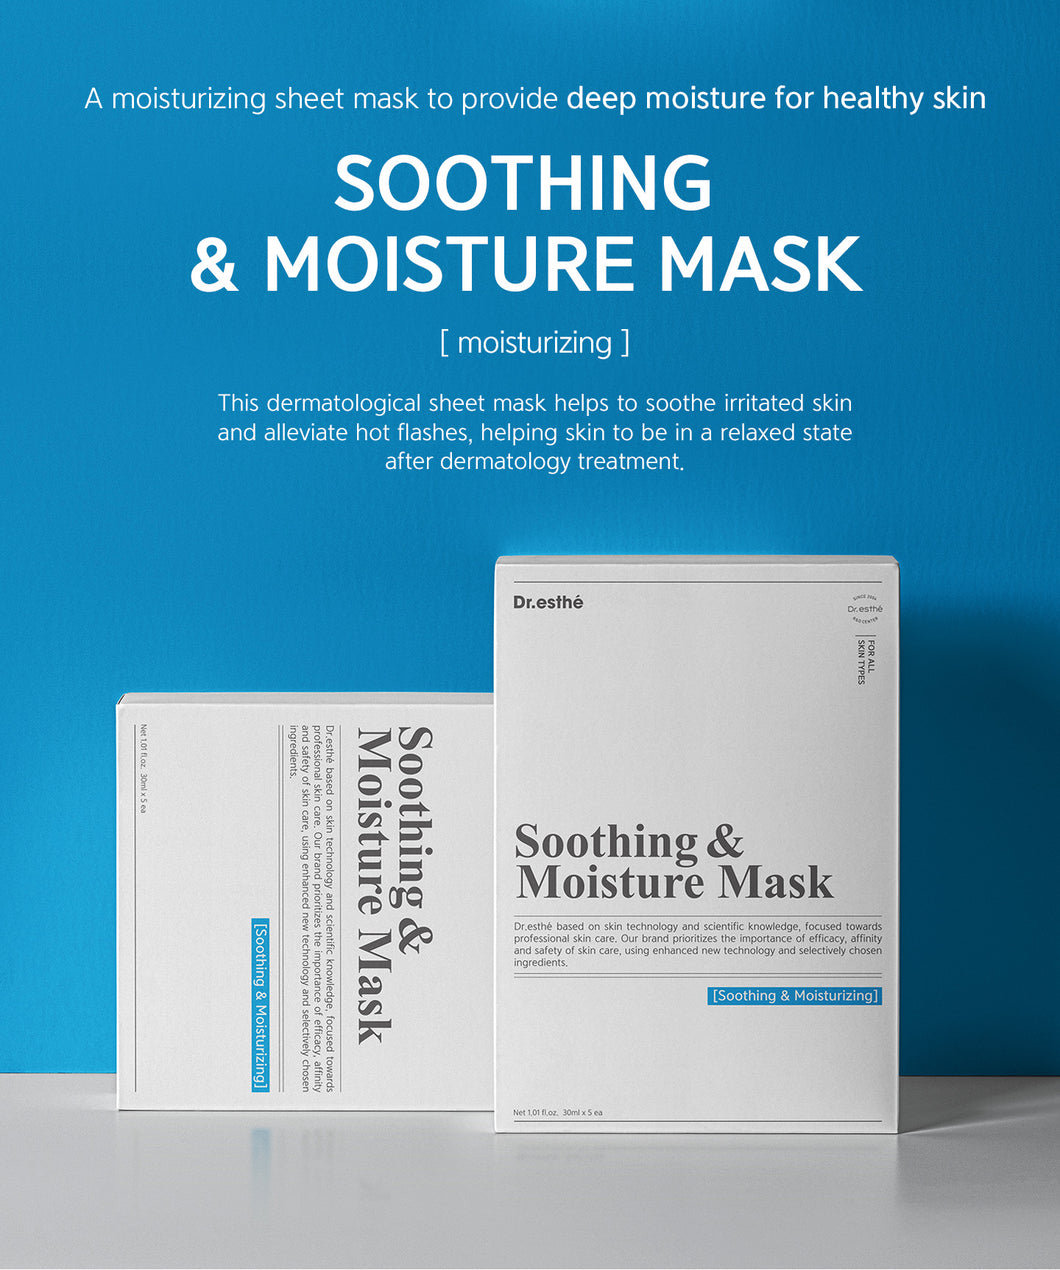 SOOTHING & MOISTURE MASK